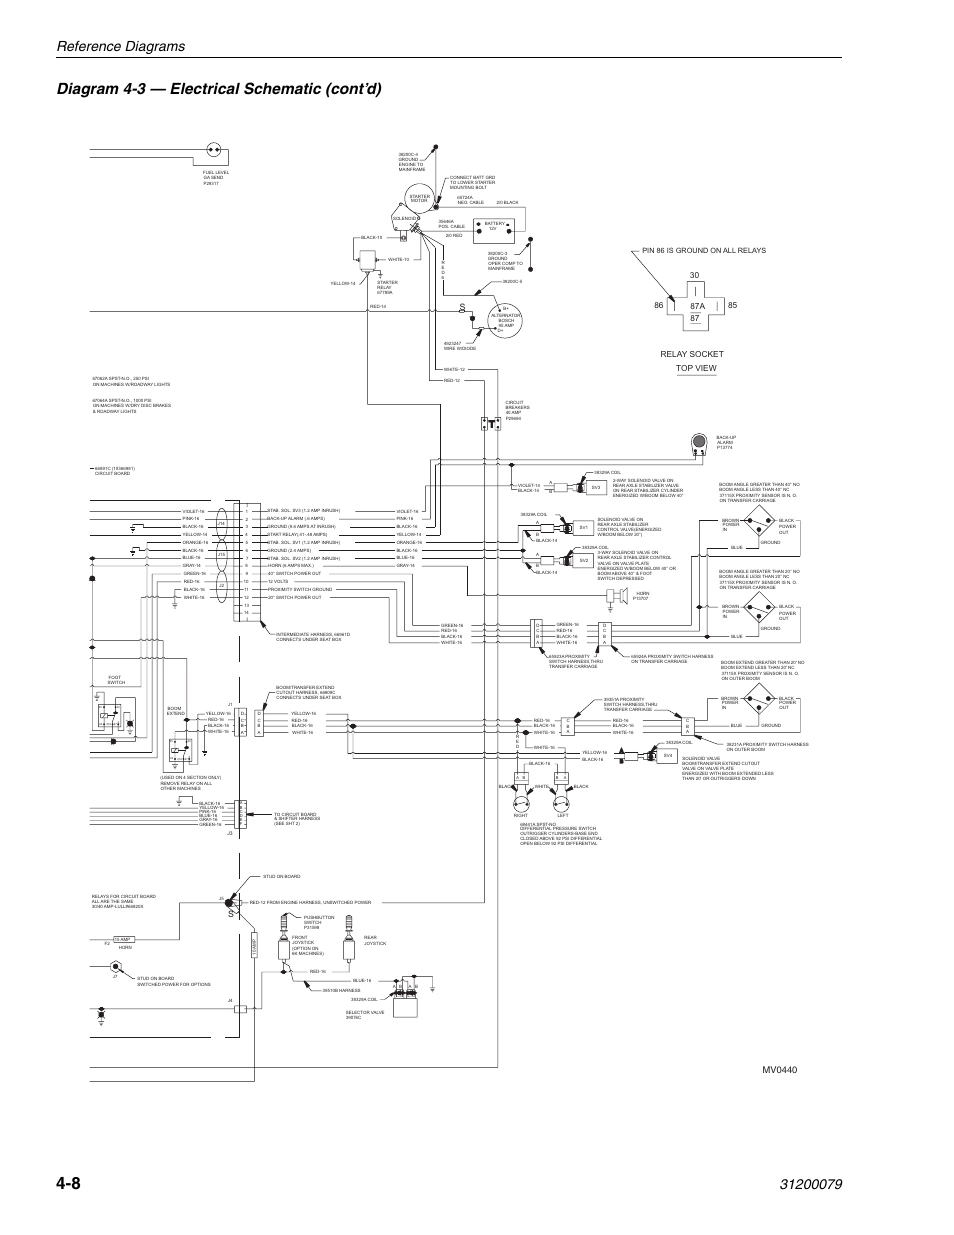 Diagram 4-3 — electrical schematic (cont’d), Reference diagrams, Mv0440